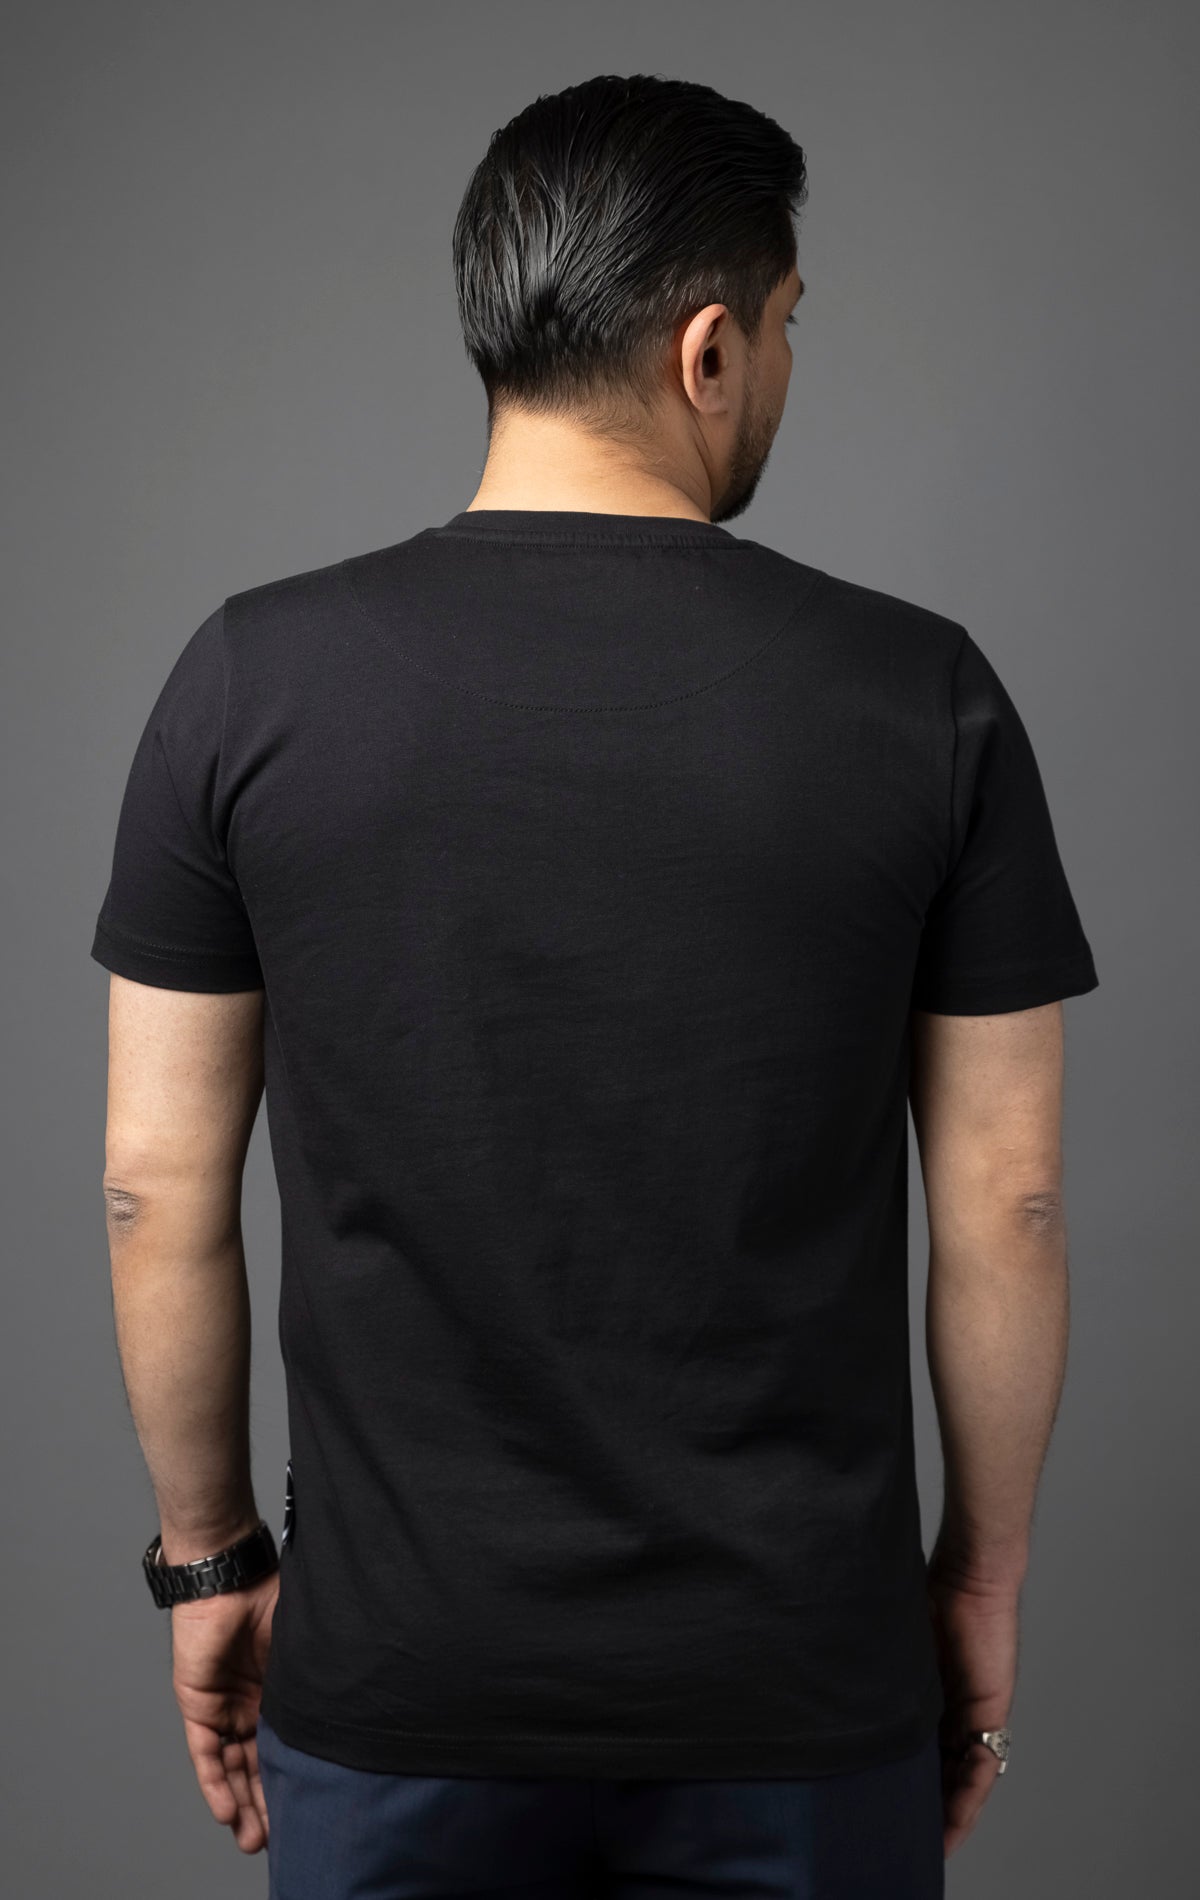 Cotton t-shirt made with 100% cotton. Showcasing a front print that reads 